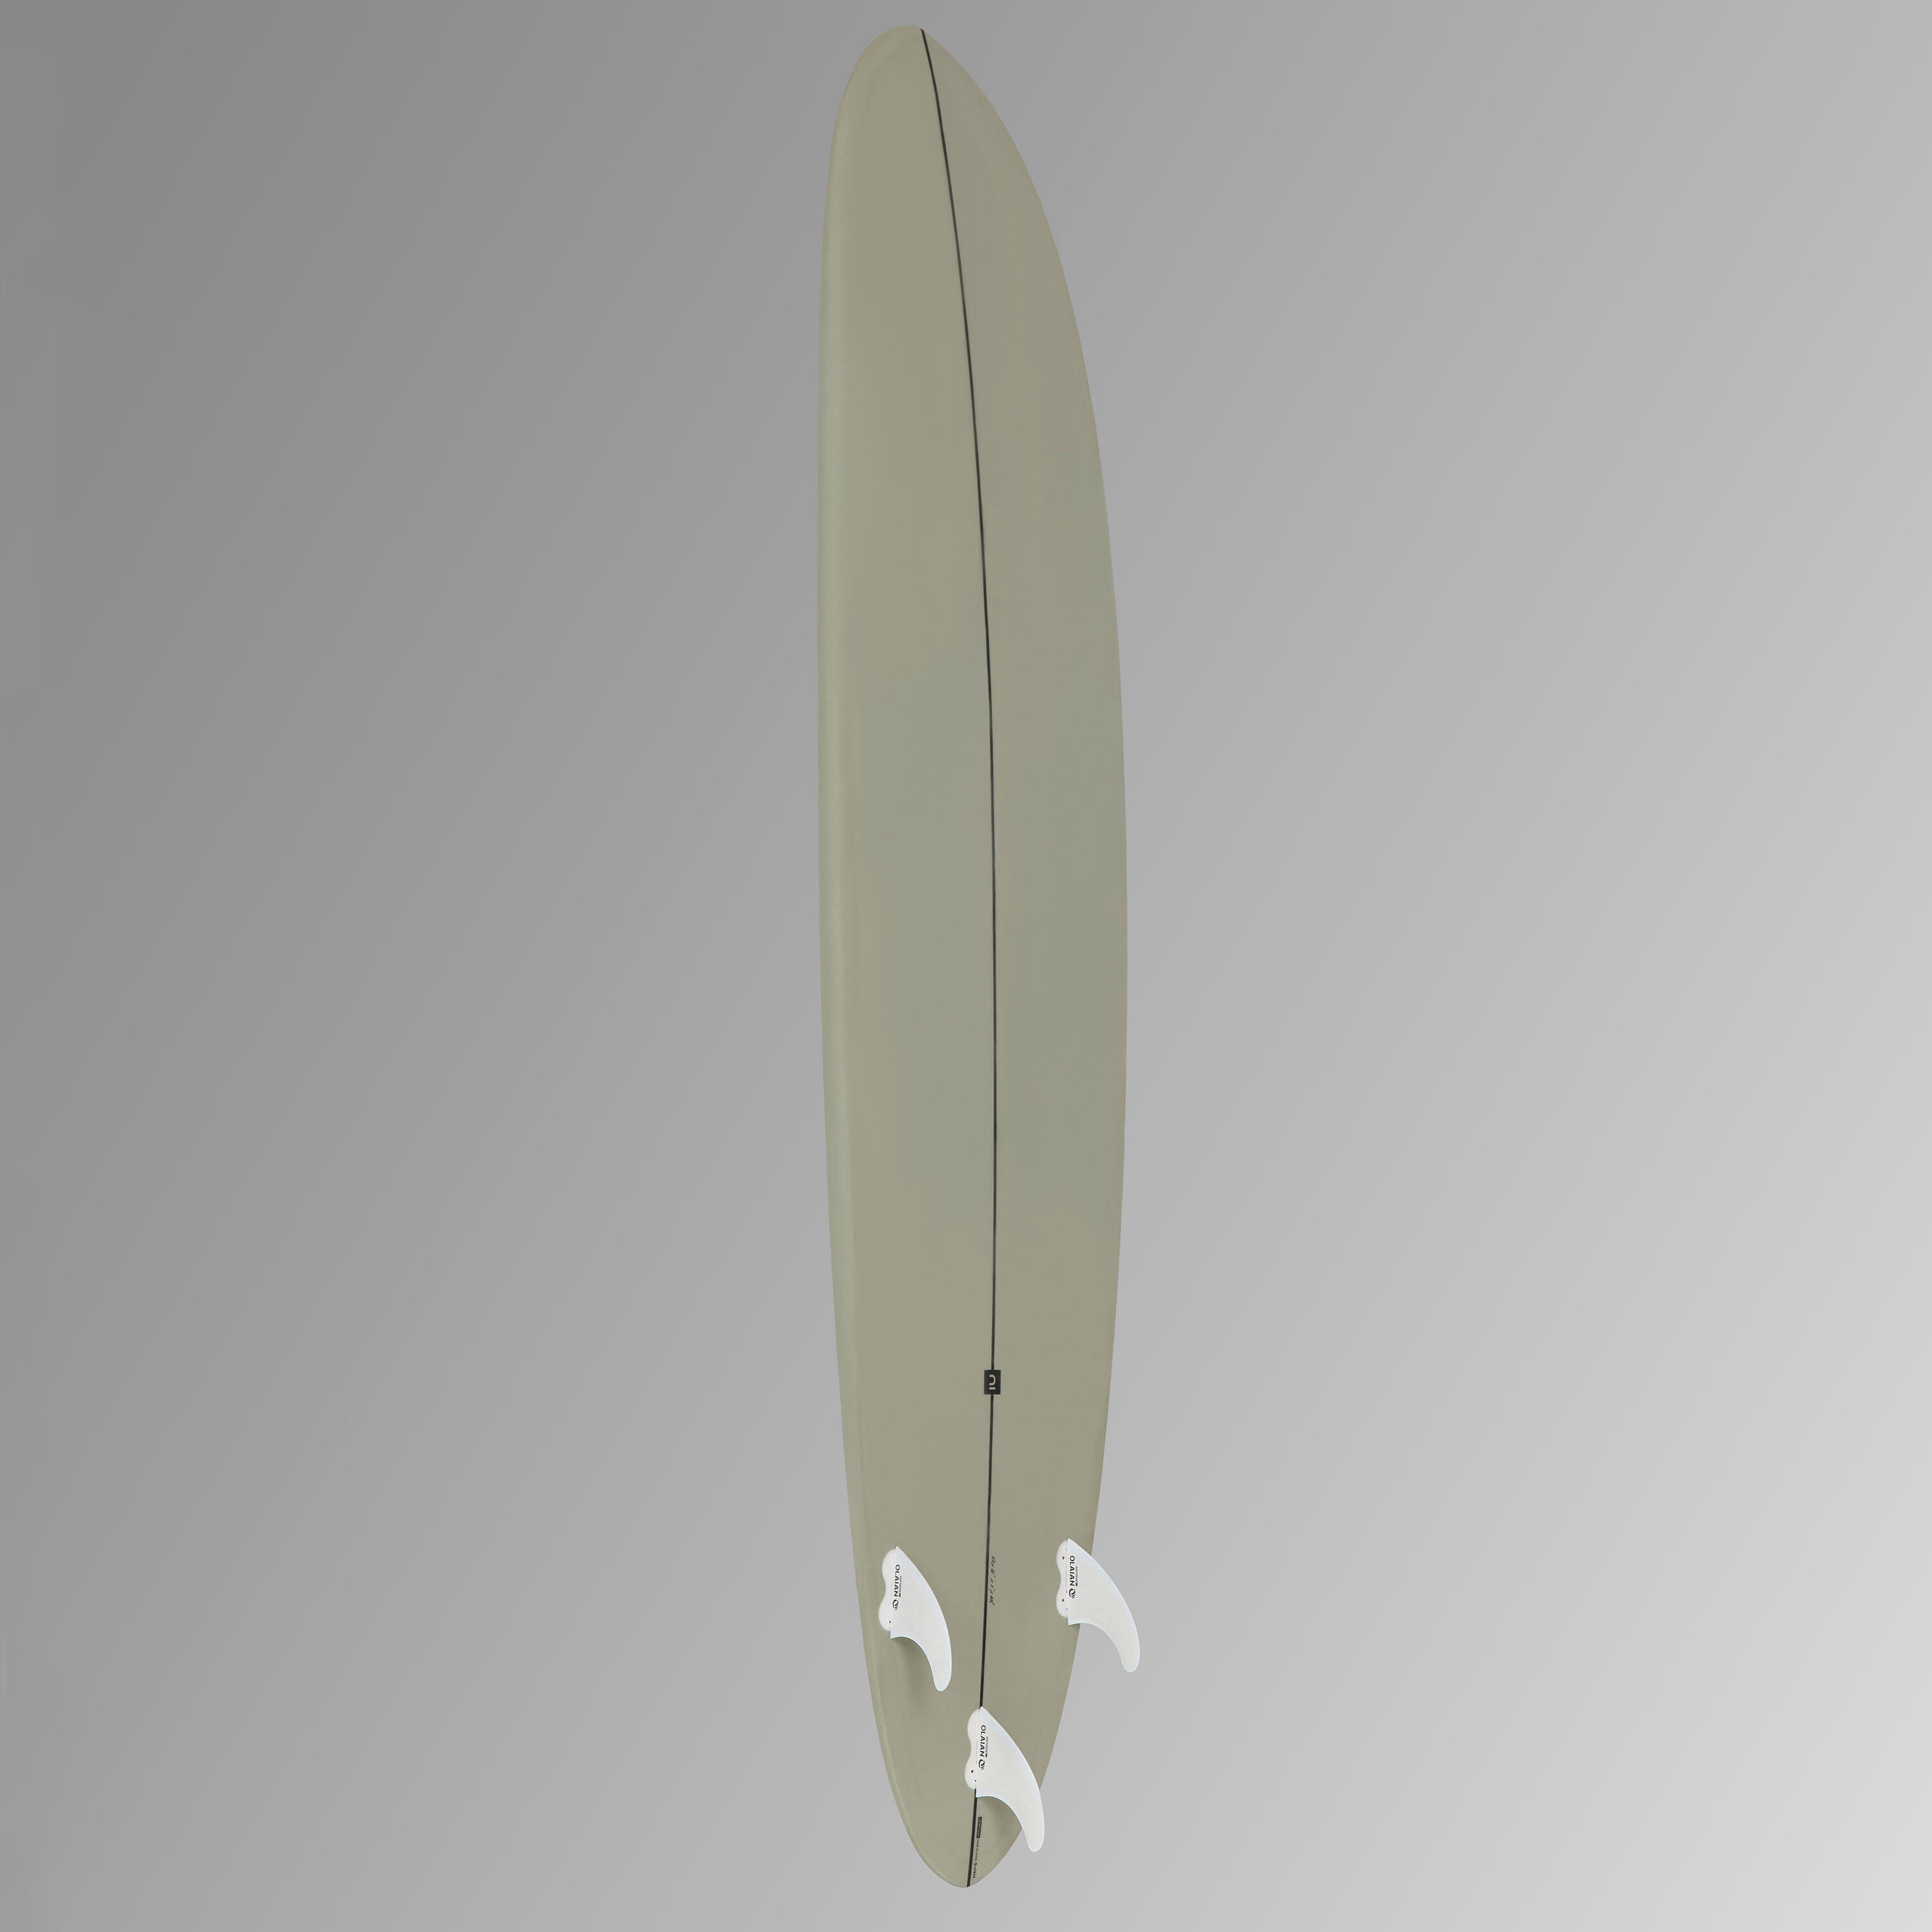 SURFBOARD 500 Hybrid 8' with 3 Fins. 9/16